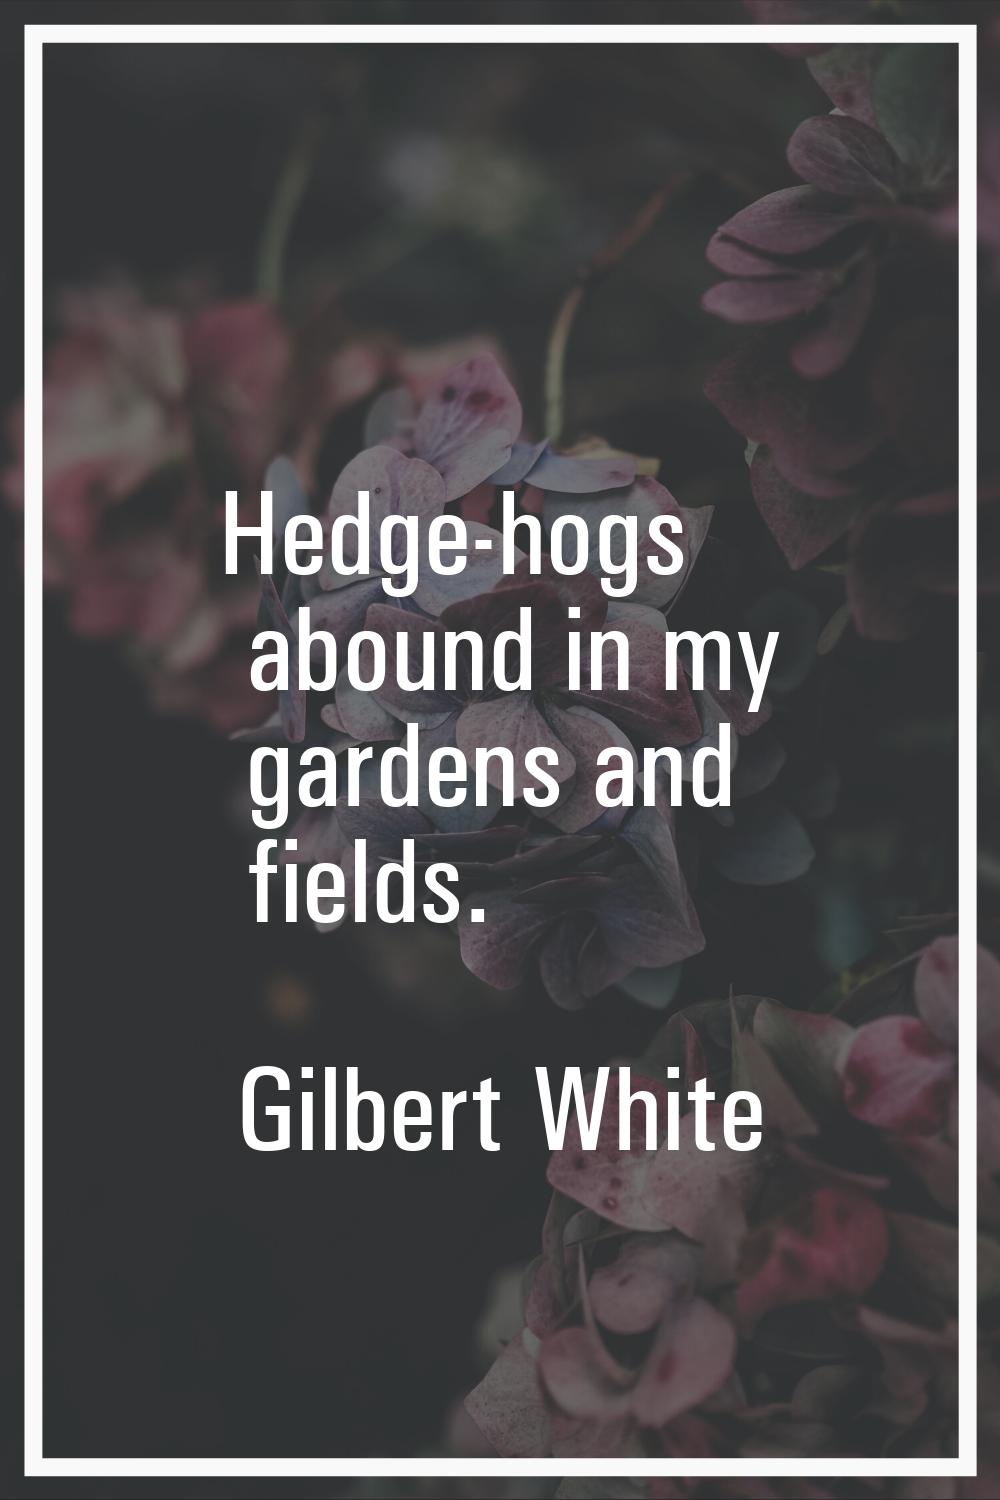 Hedge-hogs abound in my gardens and fields.